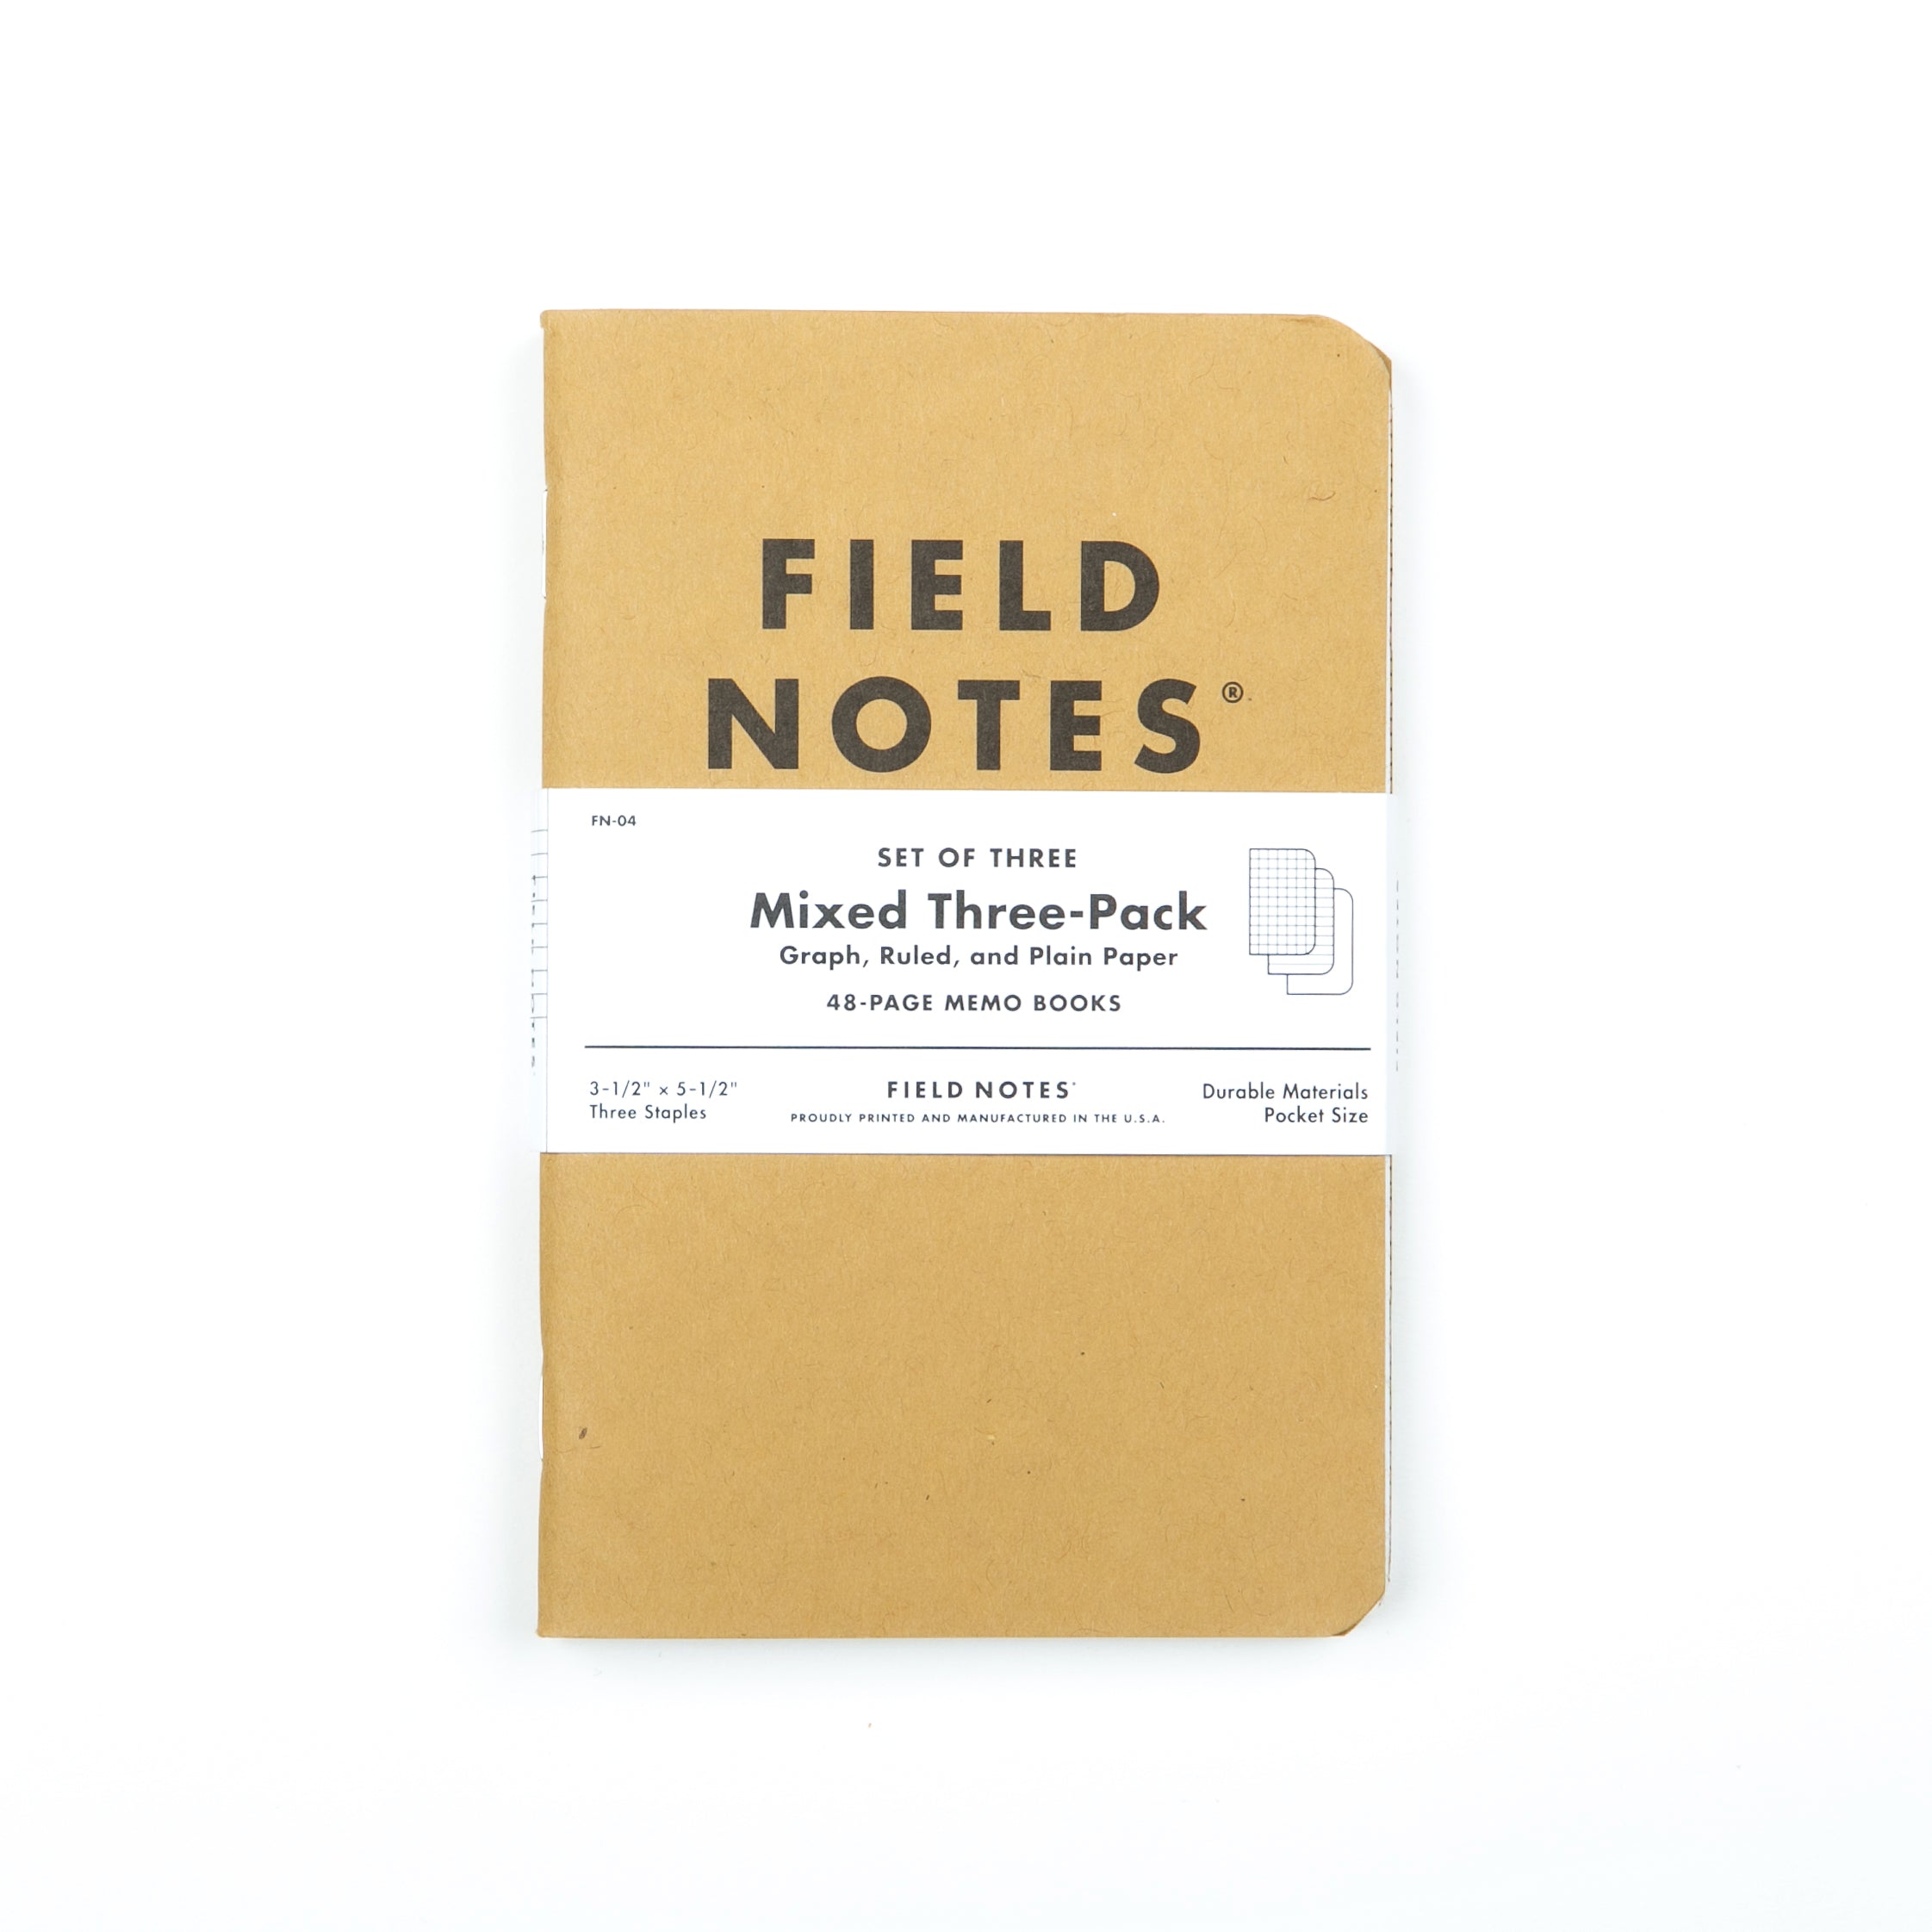 Field Notes "Mixed" Edition